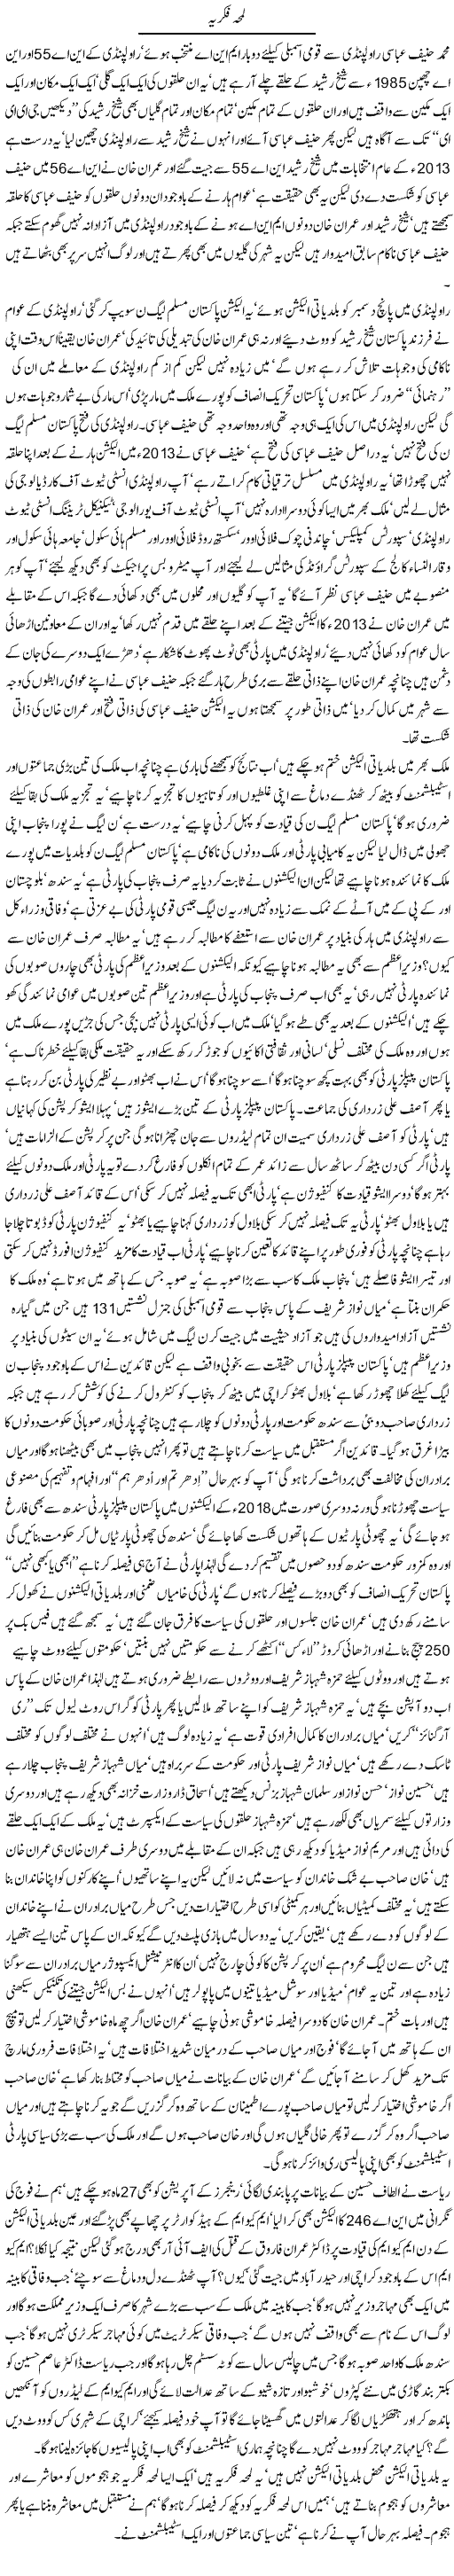 Lamha e fikria By Javed Chaudhry